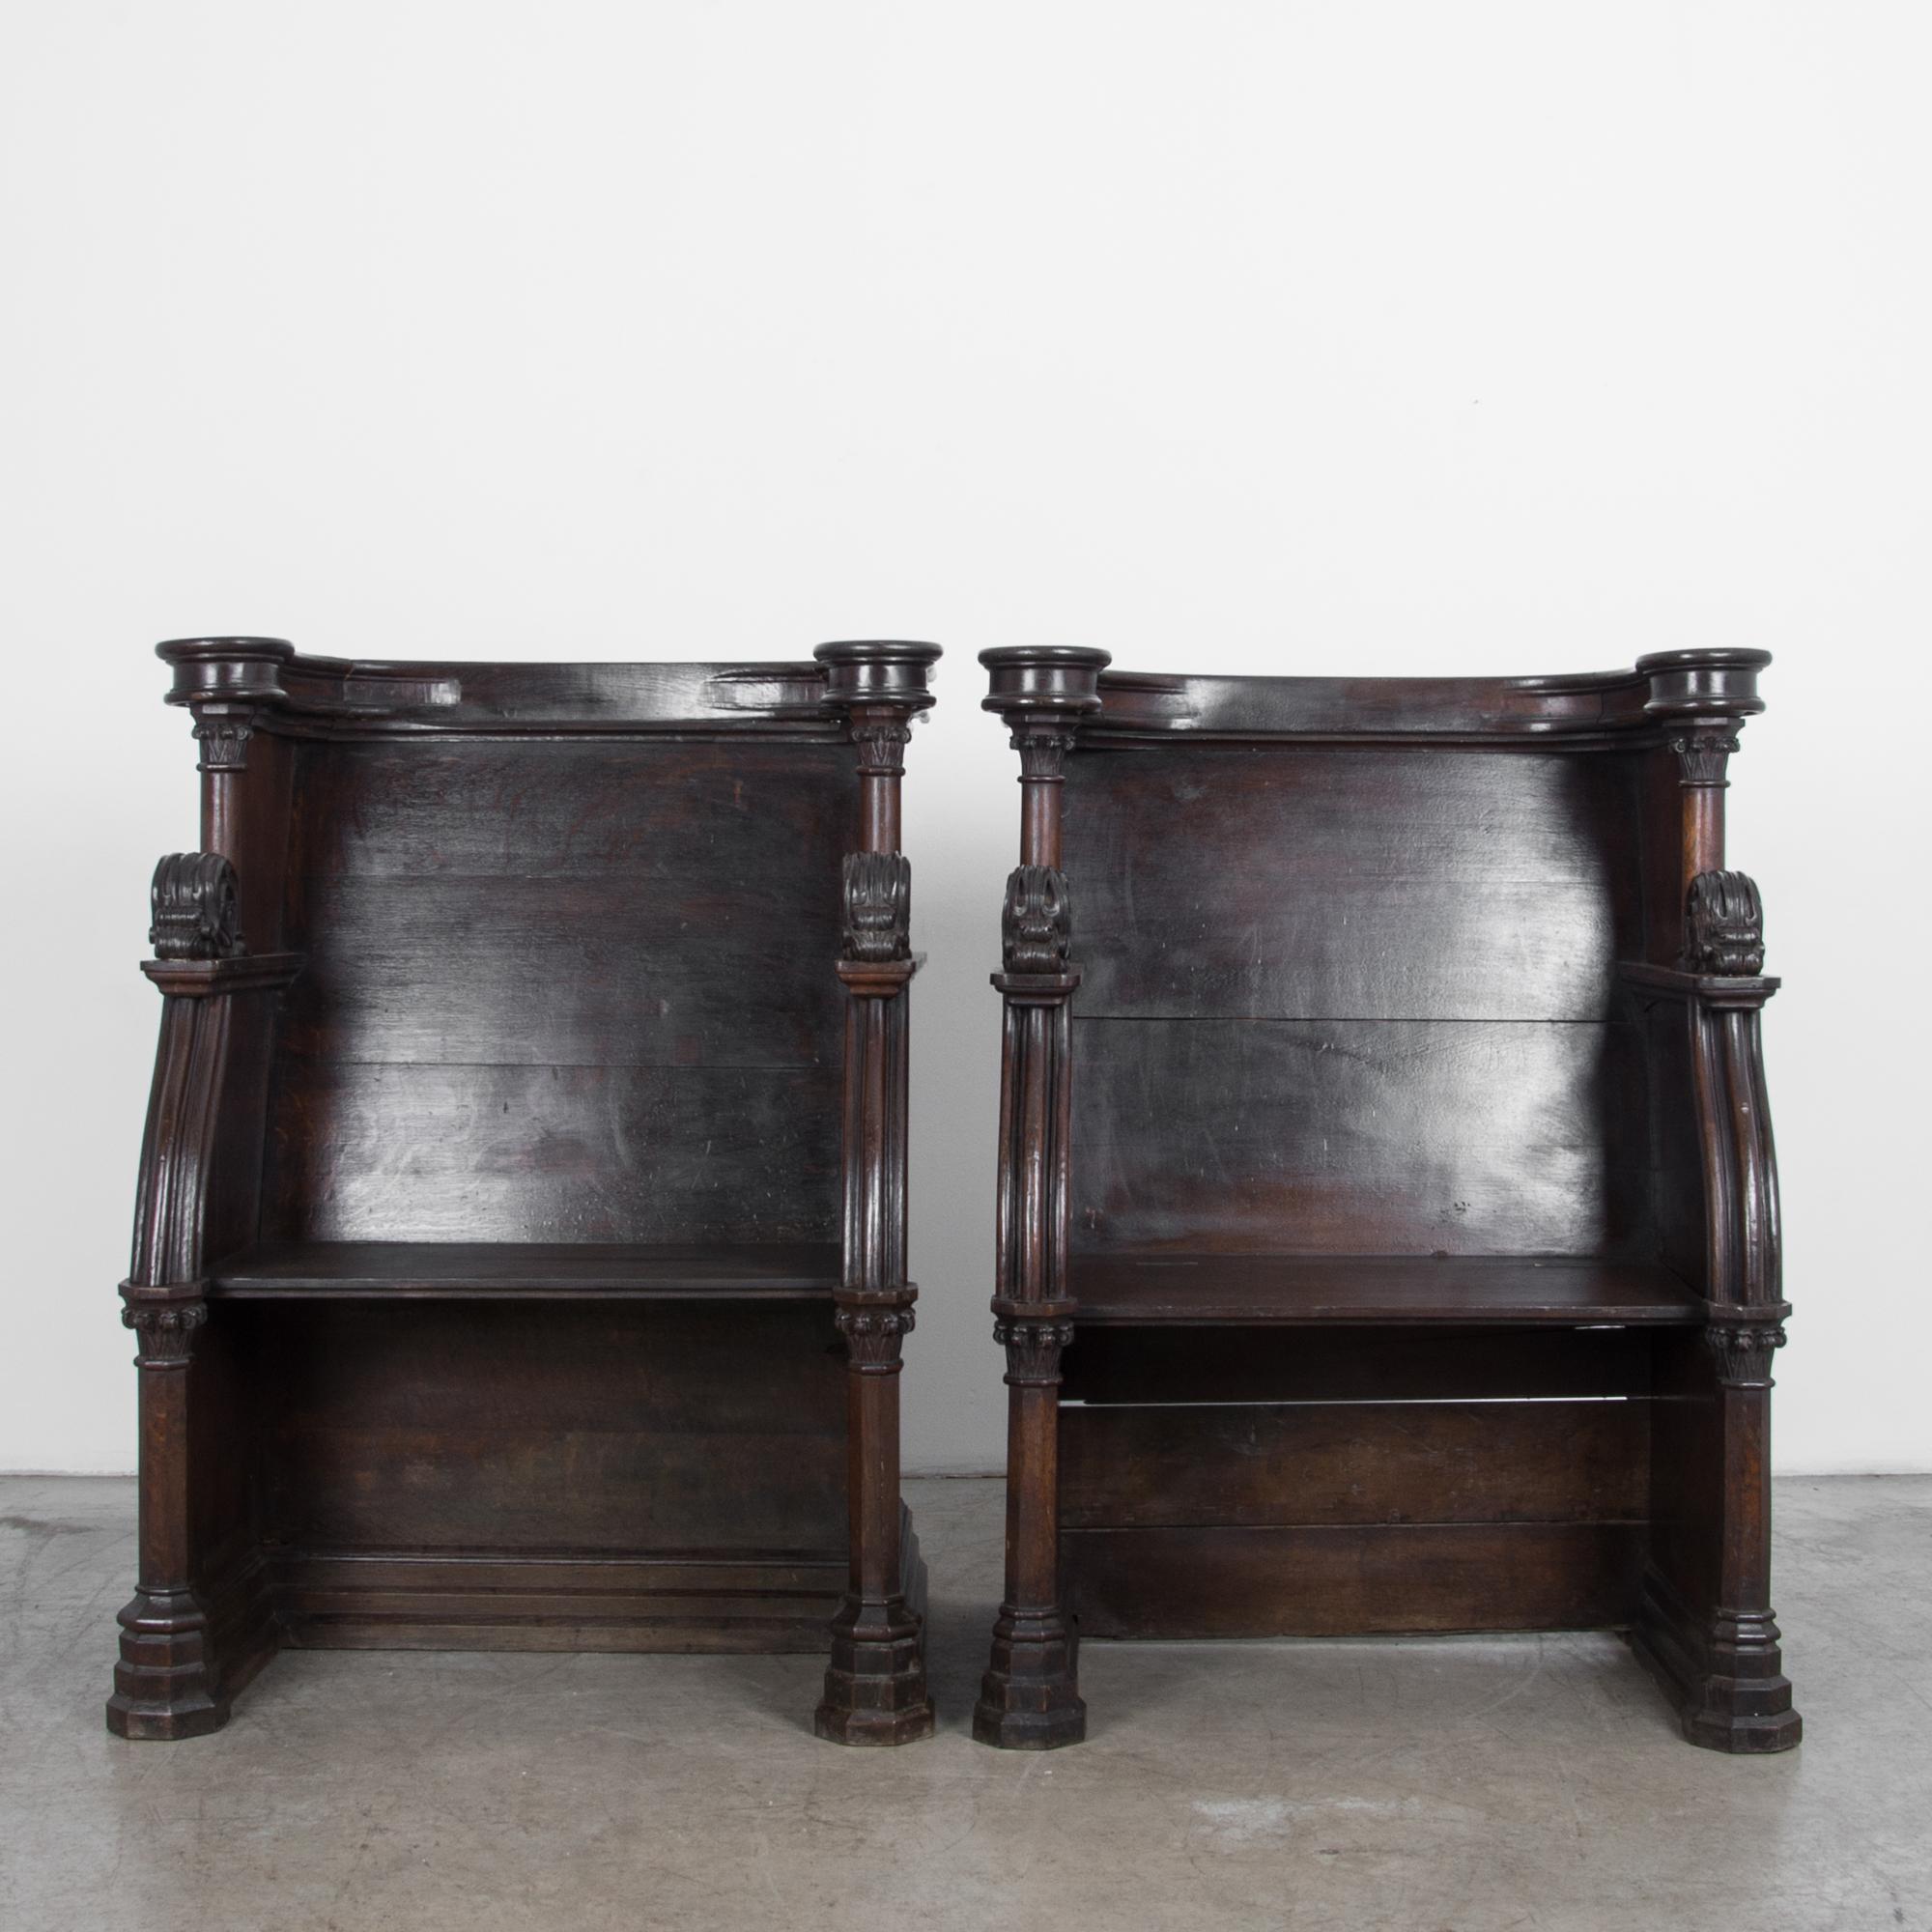 Two elegantly carved church benches from France, circa 1880. High quality construction in oak, with a traditional French polish. Details recall classical architecture, featuring a characteristic folding seat, and elegant moulding surround.